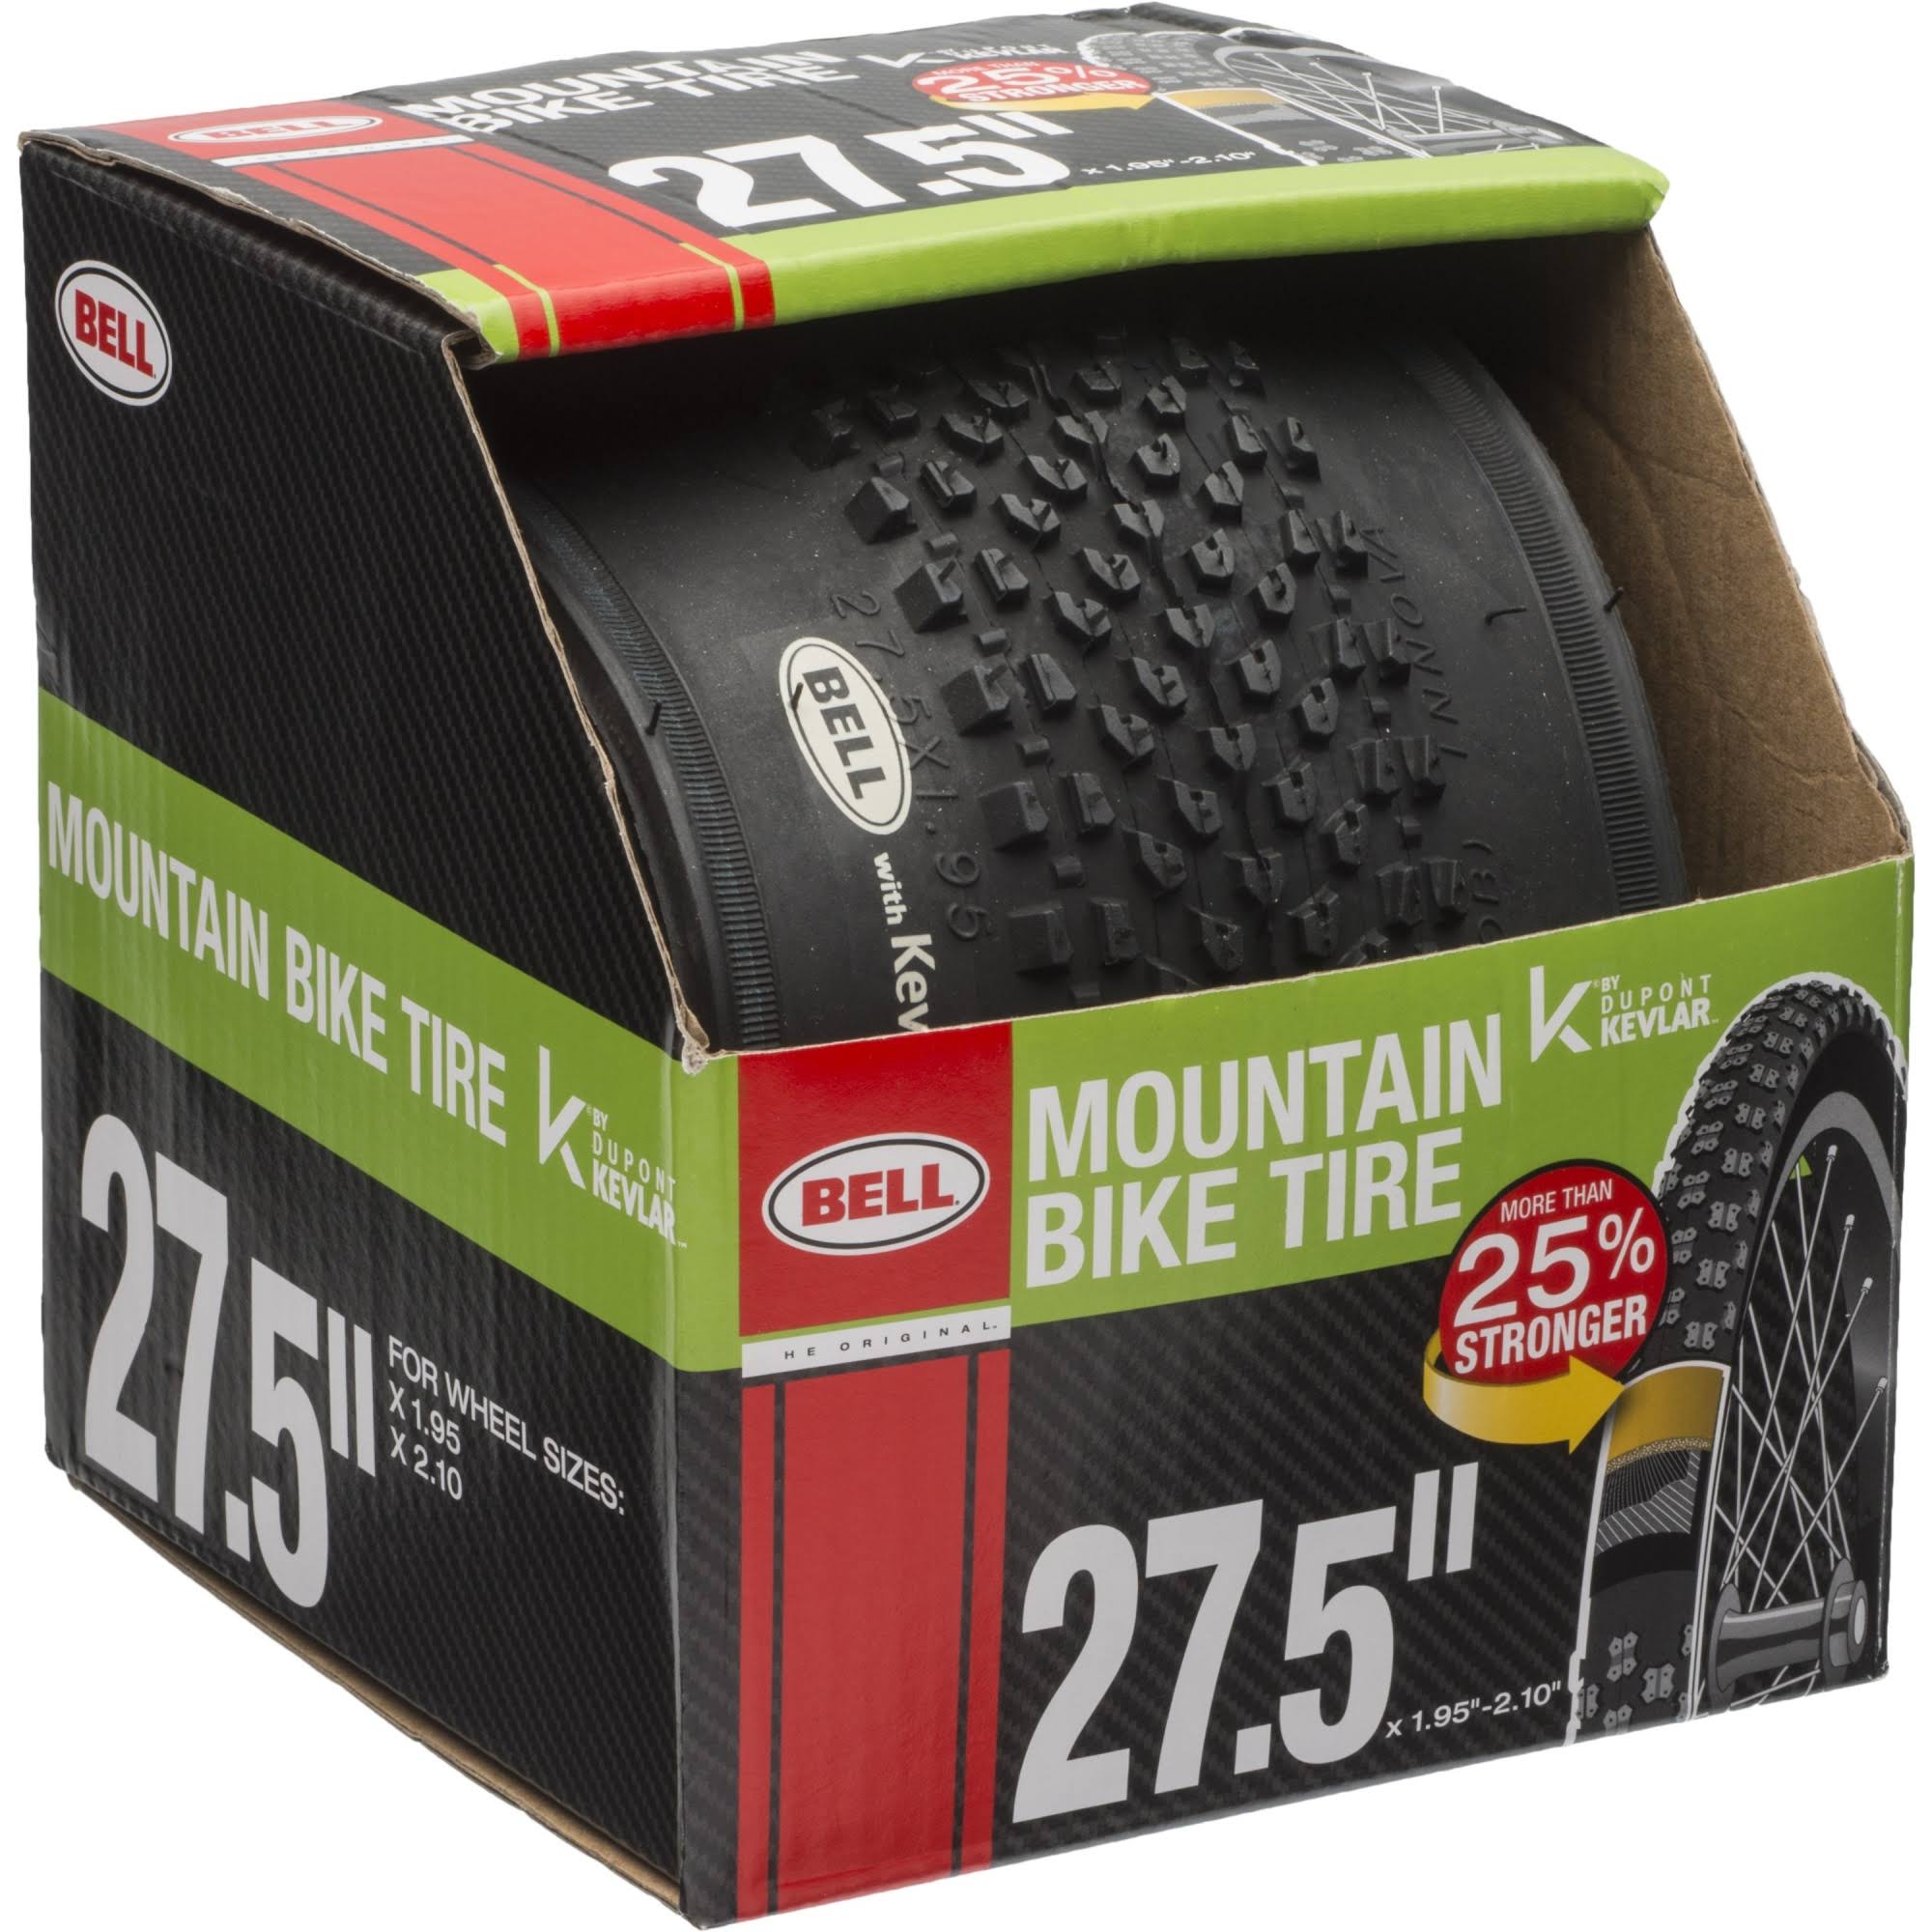 Bell Sports Traction Mountain Bike Tire - With Kevlar, 27.5"x1.90-2.10", Black